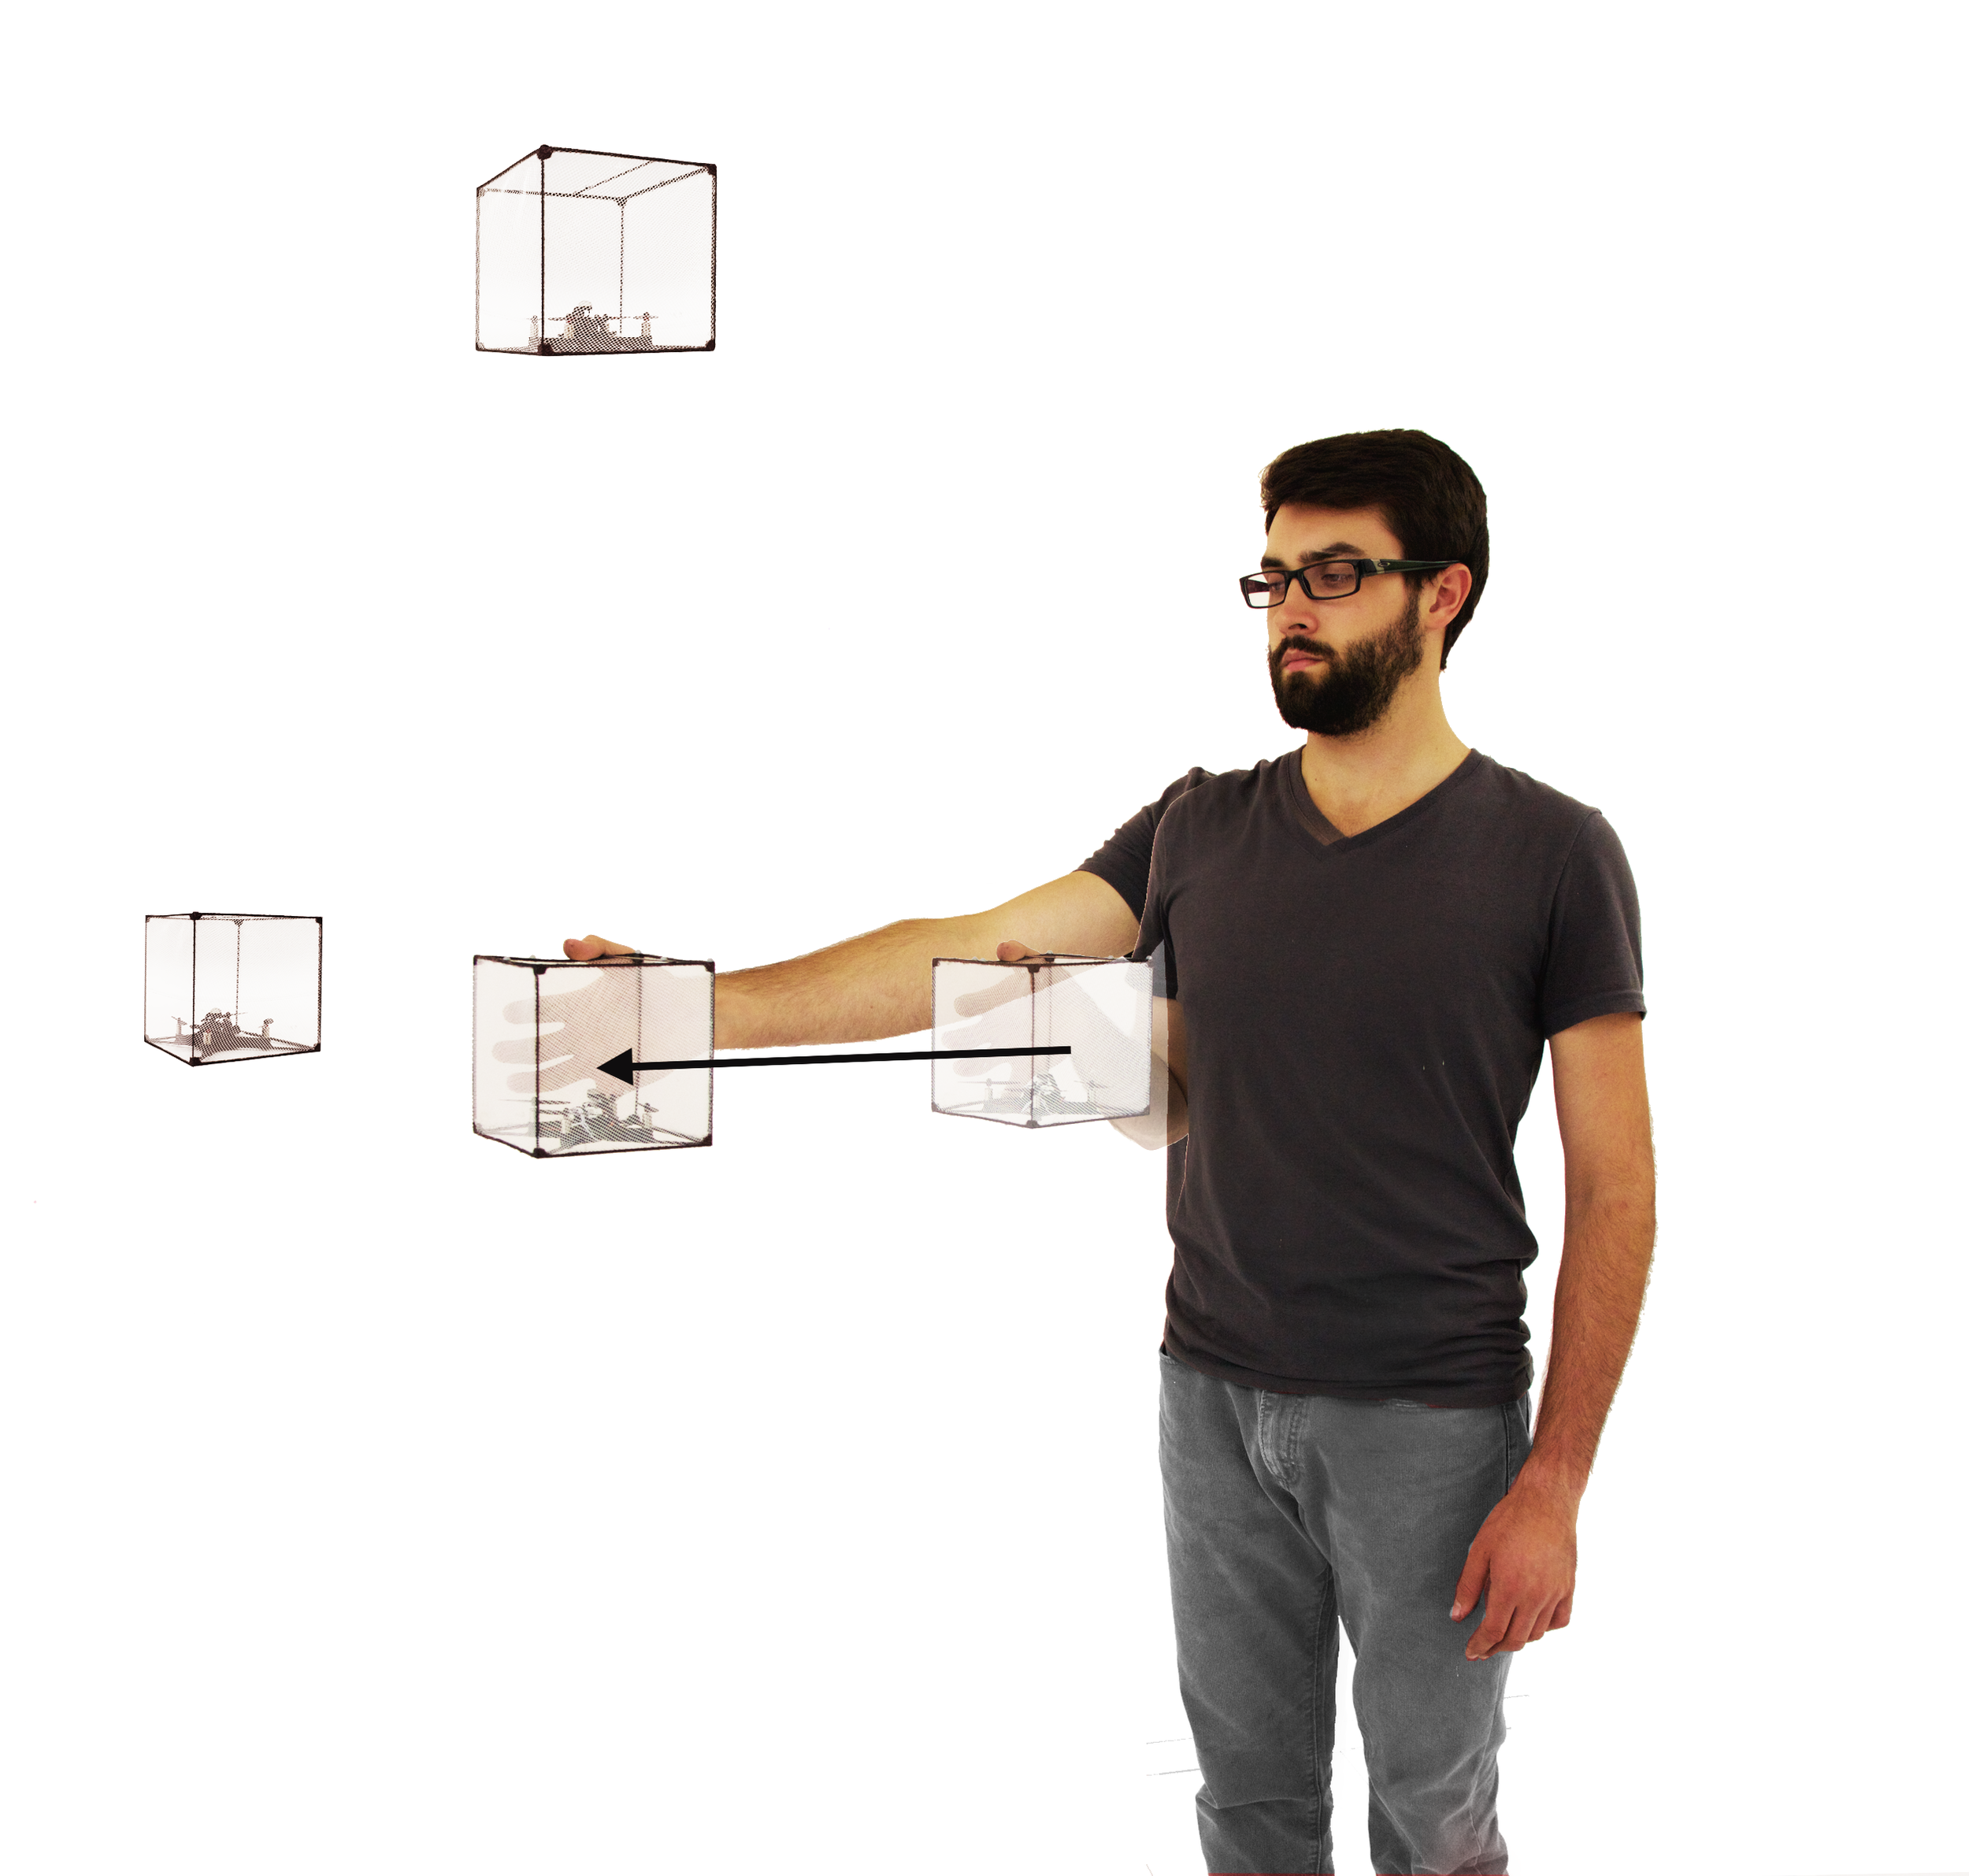 BitDrones (2015): Placing a ShapeDrone in mid-air.